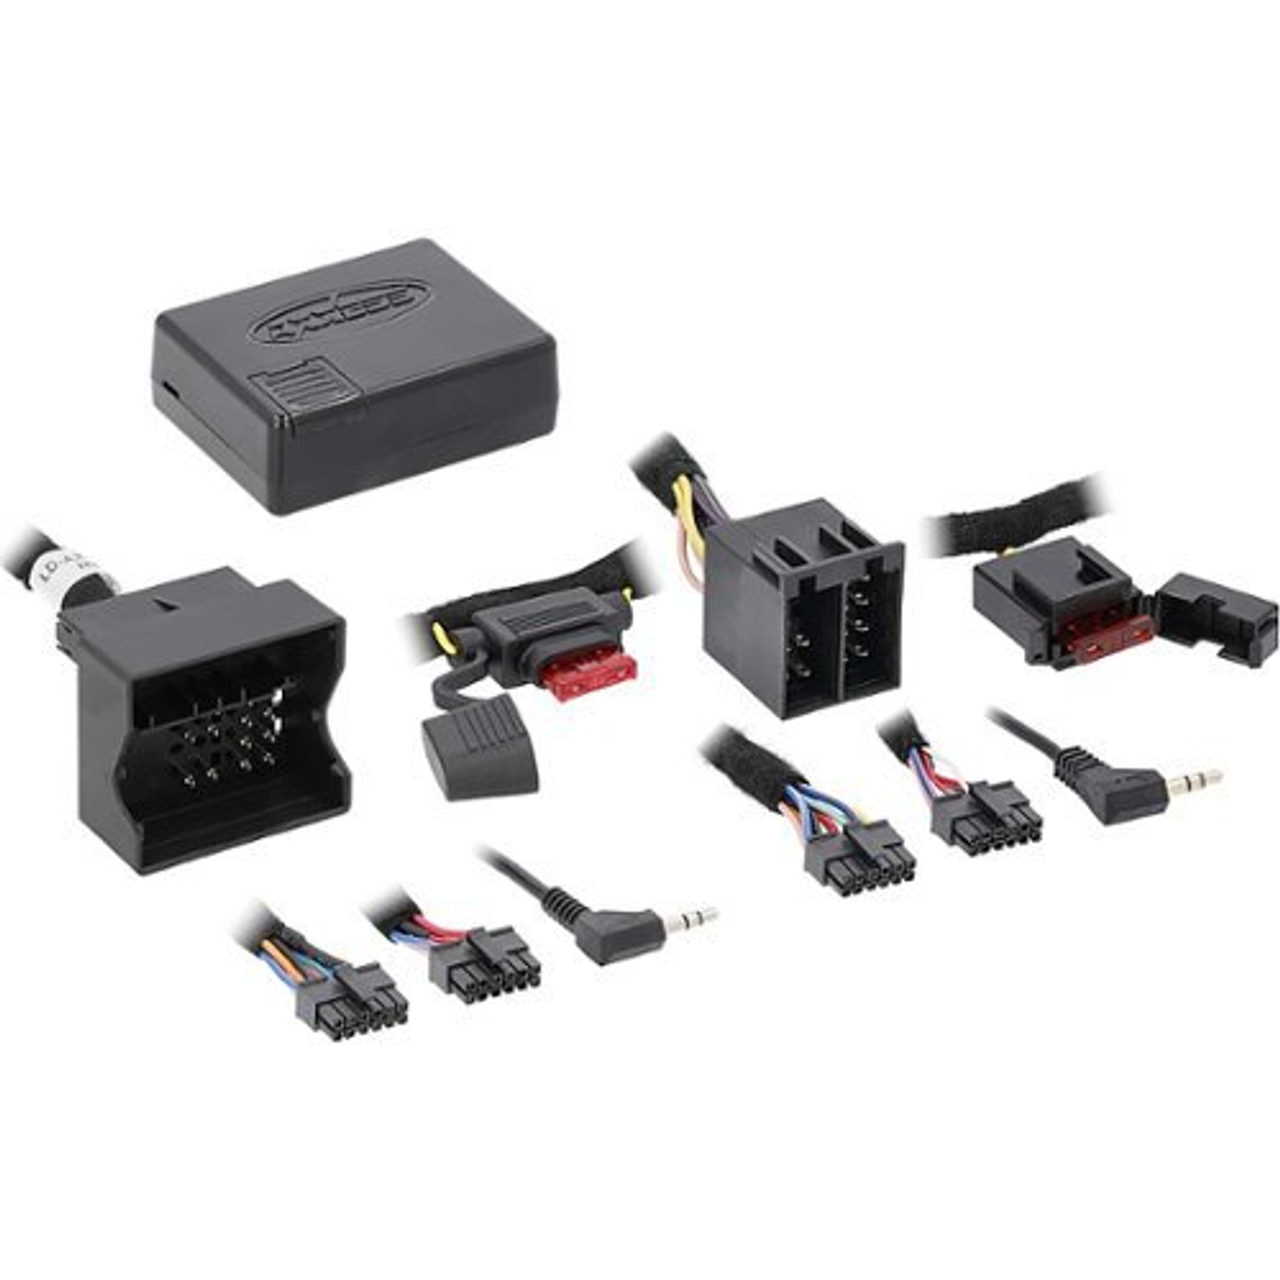 Metra - Accessory and NAV Outputs Interface for Select 2007-Up Dodge, Mercedes, and Freightliner Vehicles - Multi